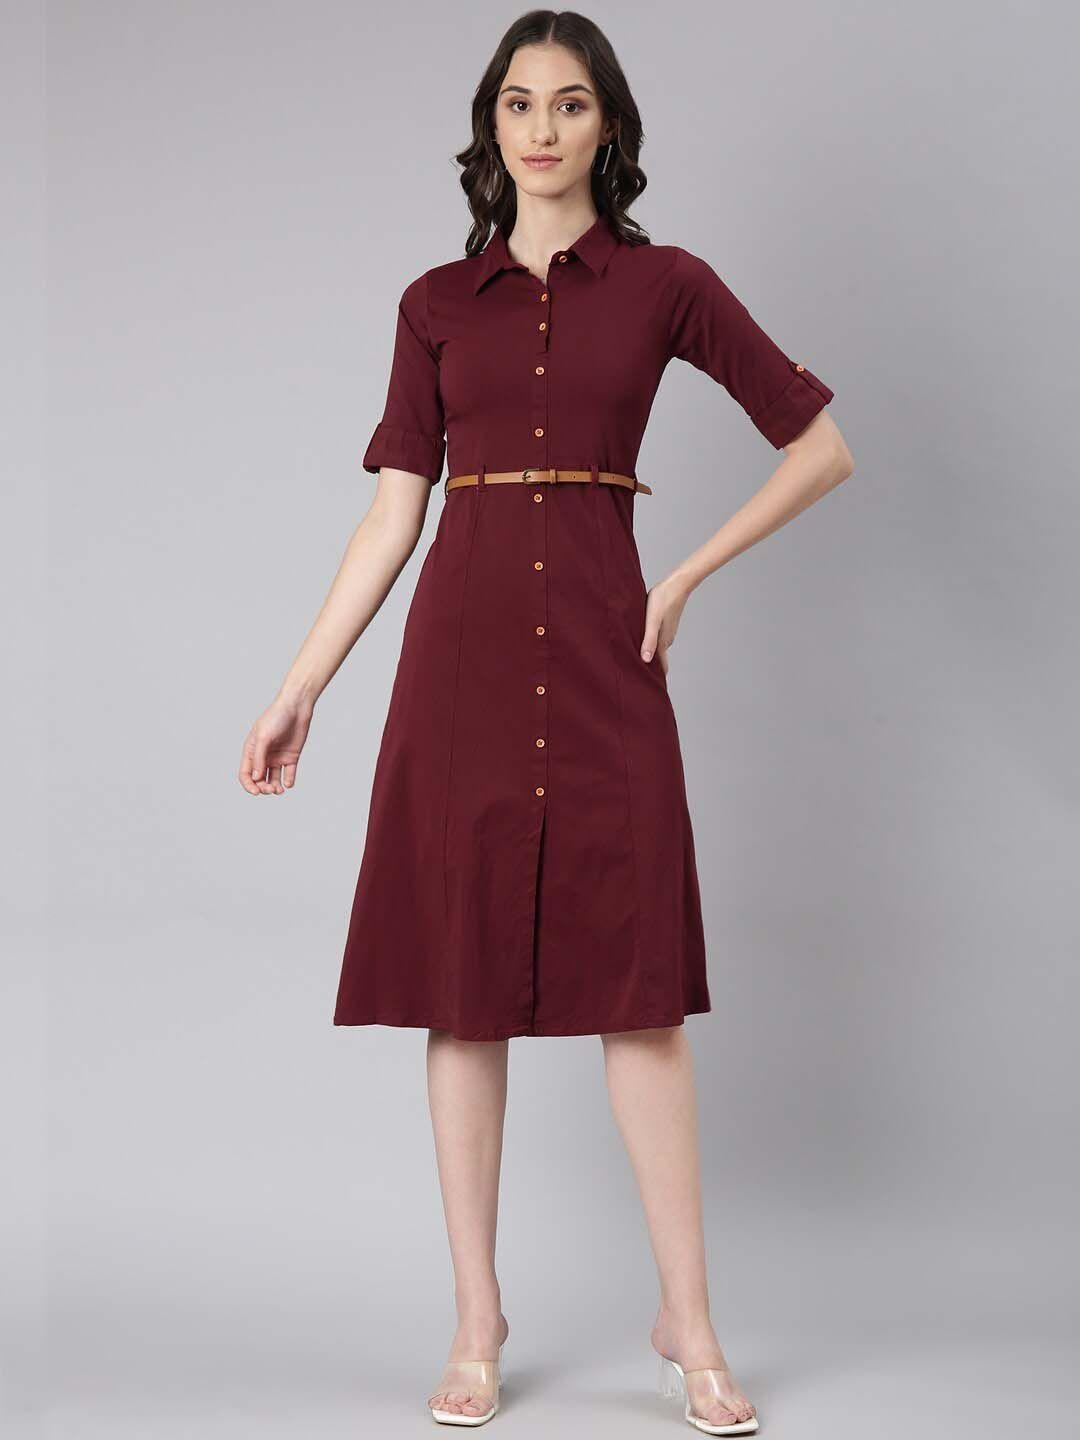 showoff belted shirt style dress